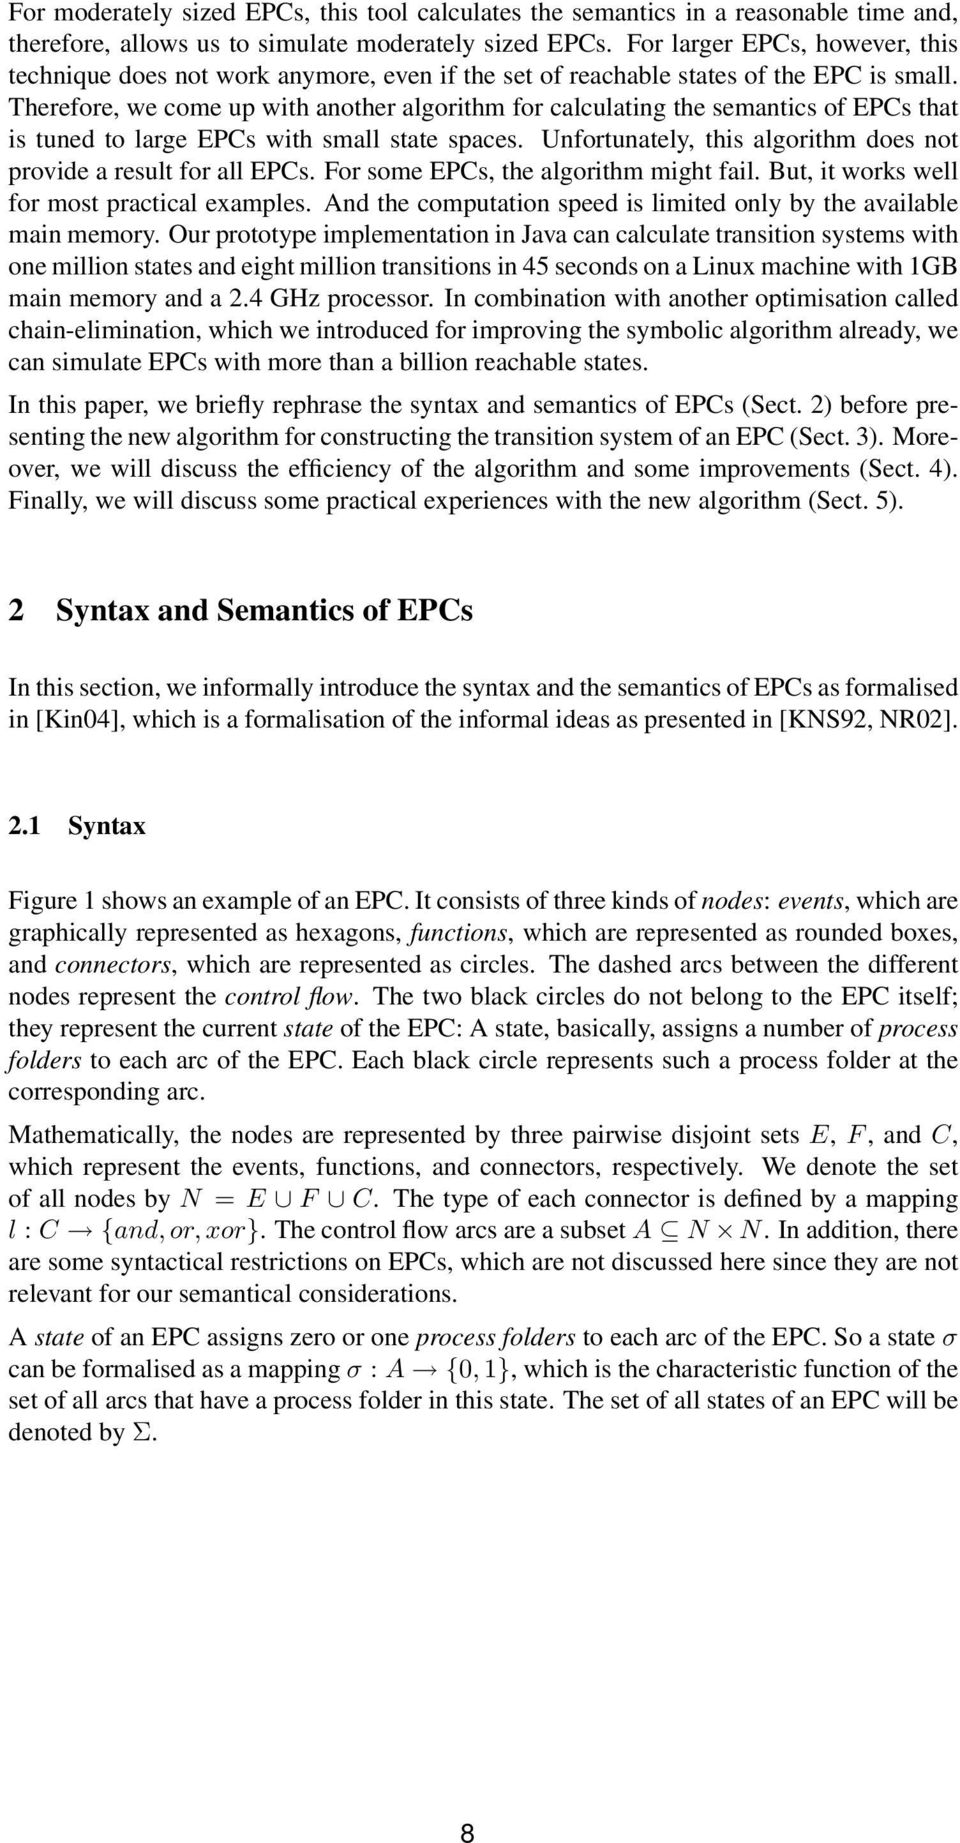 Therefore, we come up with another algorithm for calculating the semantics of EPCs that is tuned to large EPCs with small state spaces.